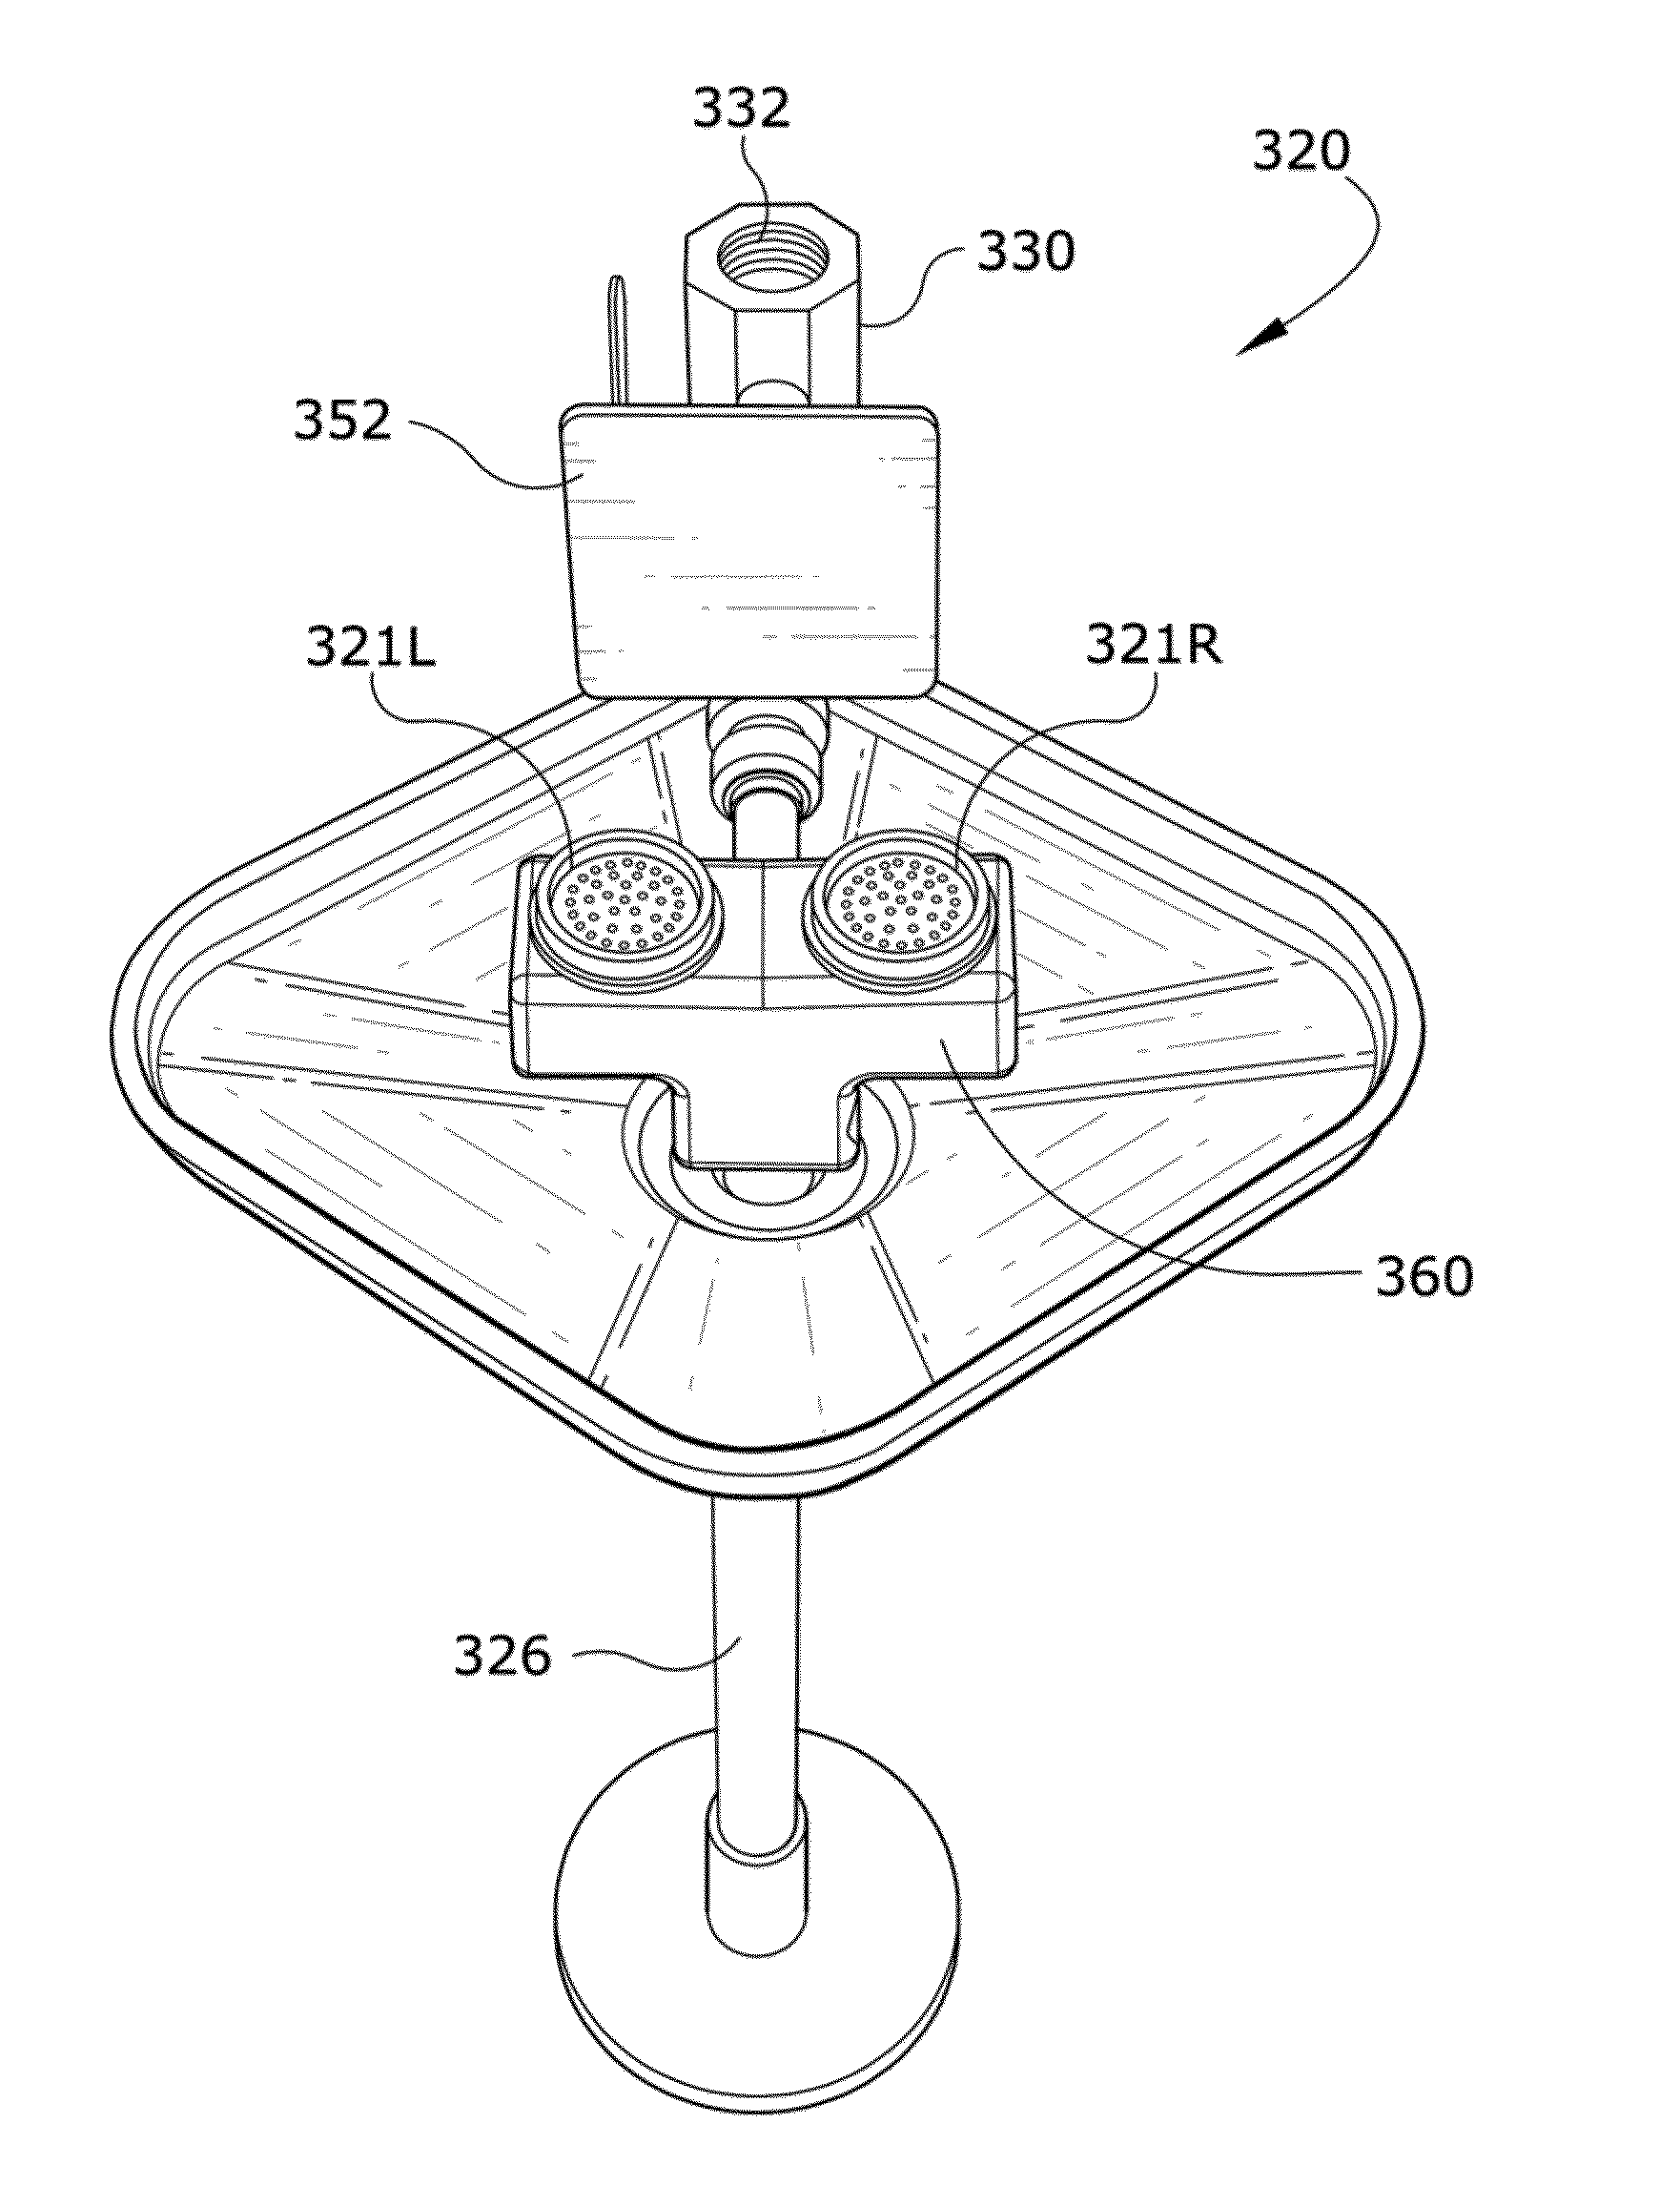 Flushing system for a safety system